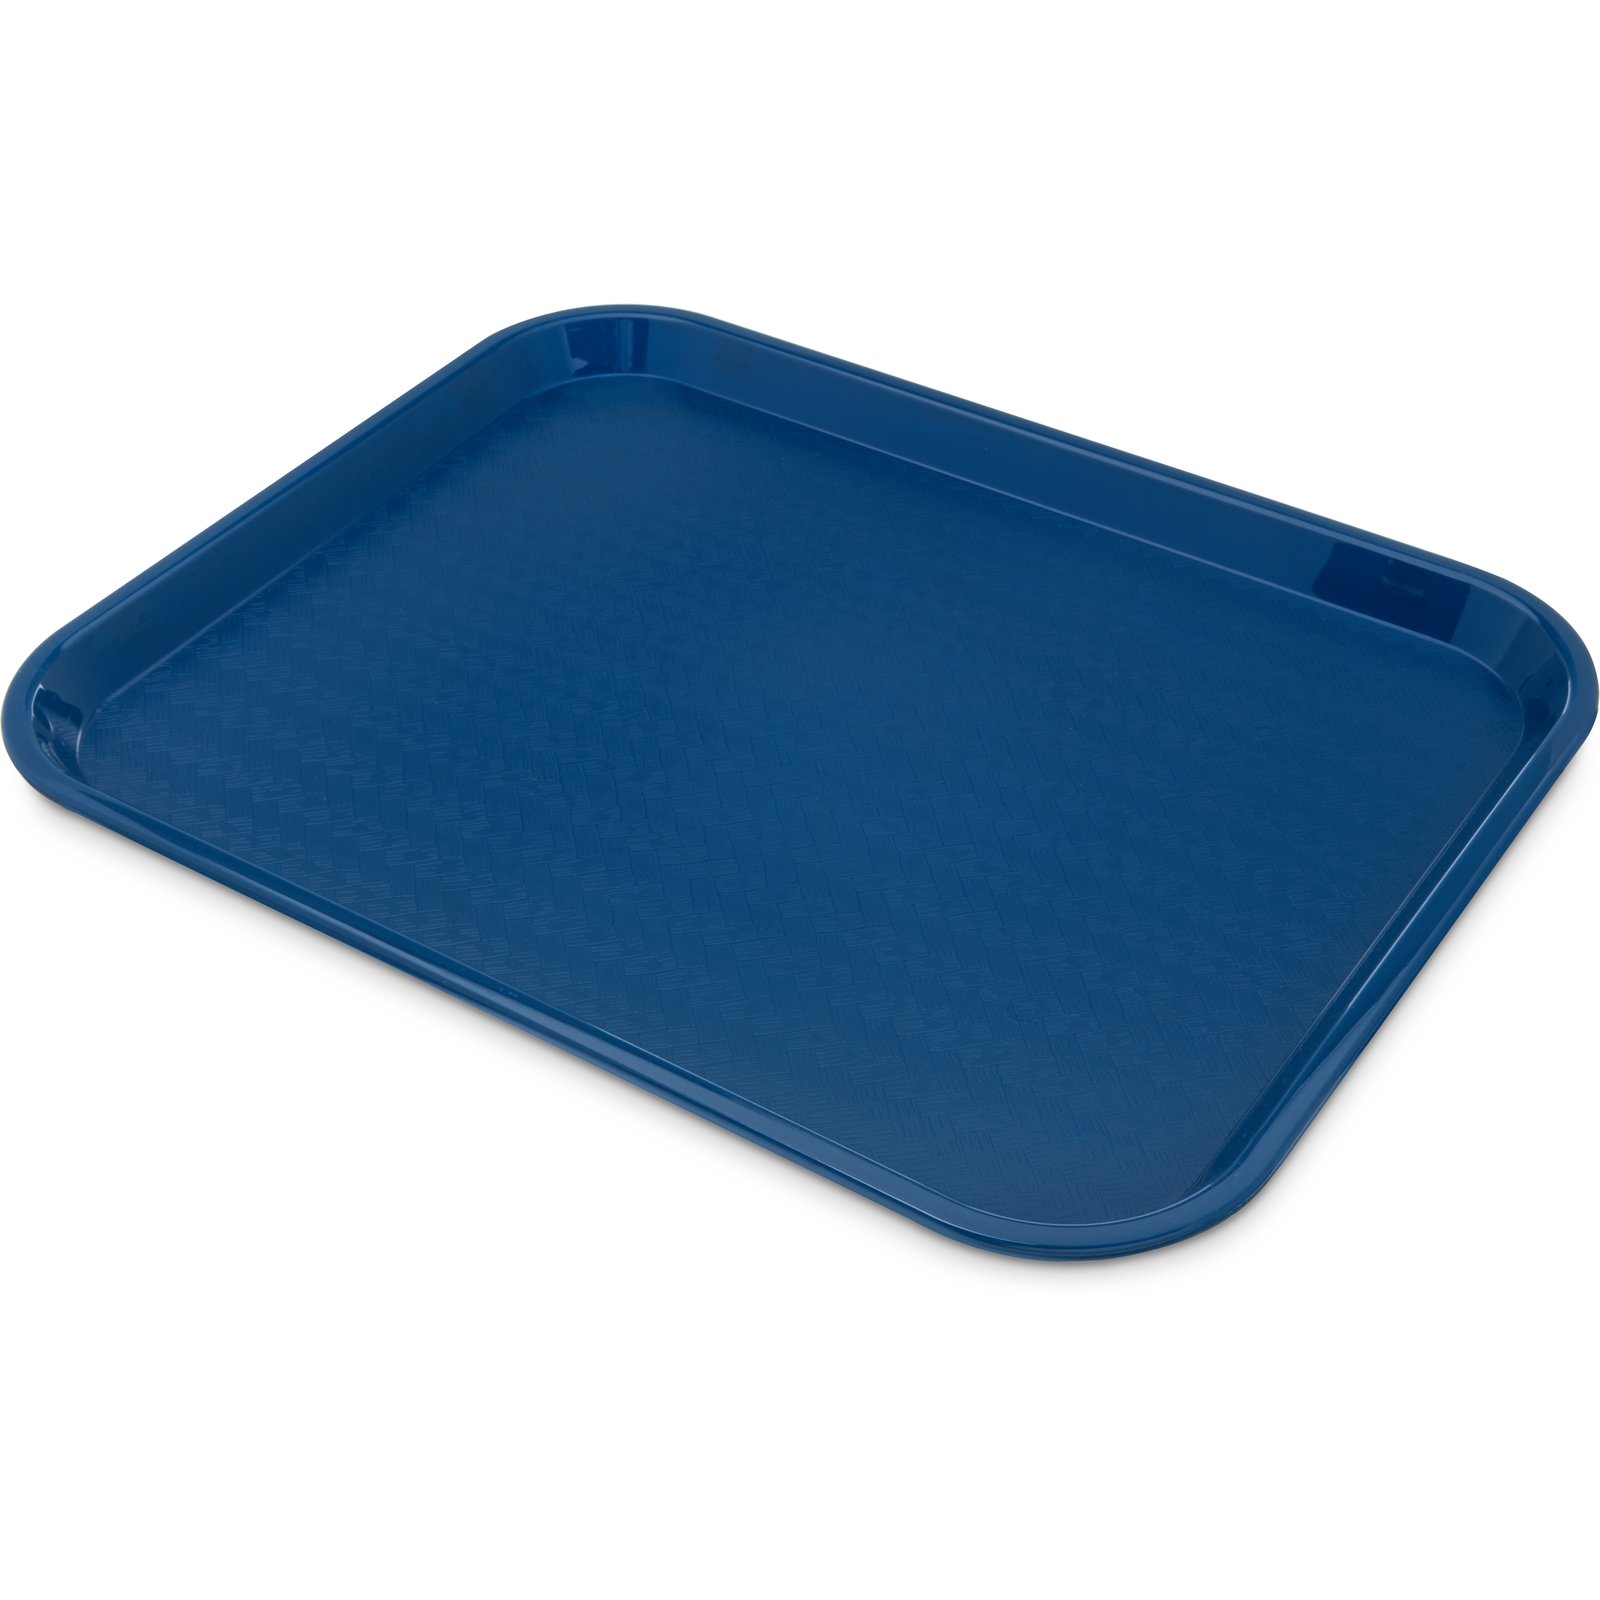 CAFETERIA TRAYS - FAST FOOD TRAY 